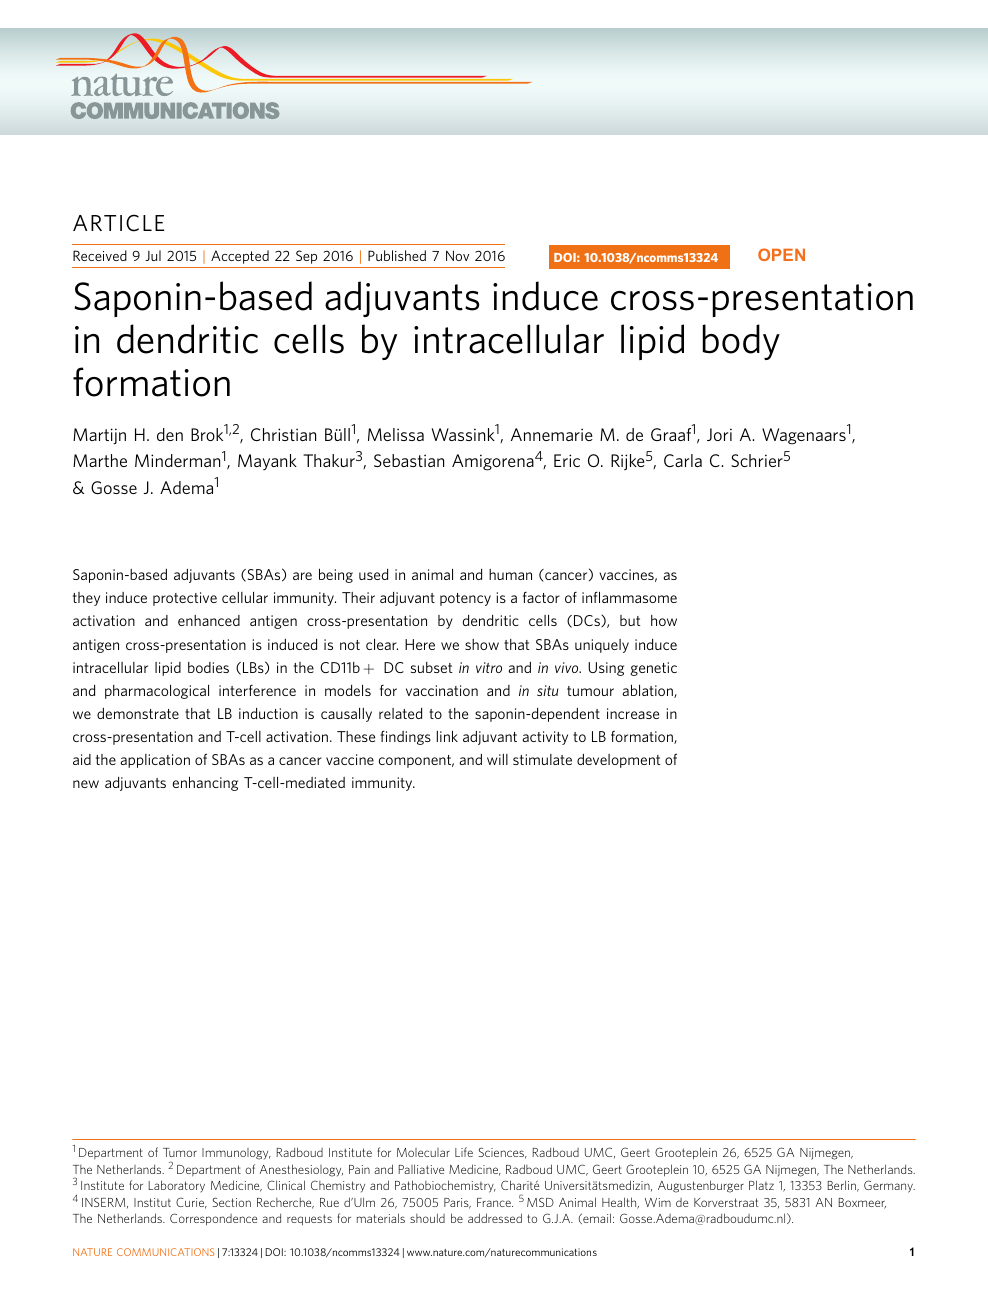 Saponin Based Adjuvants Induce Cross Presentation In Dendritic Cells By Intracellular Lipid Body Formation Topic Of Research Paper In Biological Sciences Download Scholarly Article Pdf And Read For Free On Cyberleninka Open Science